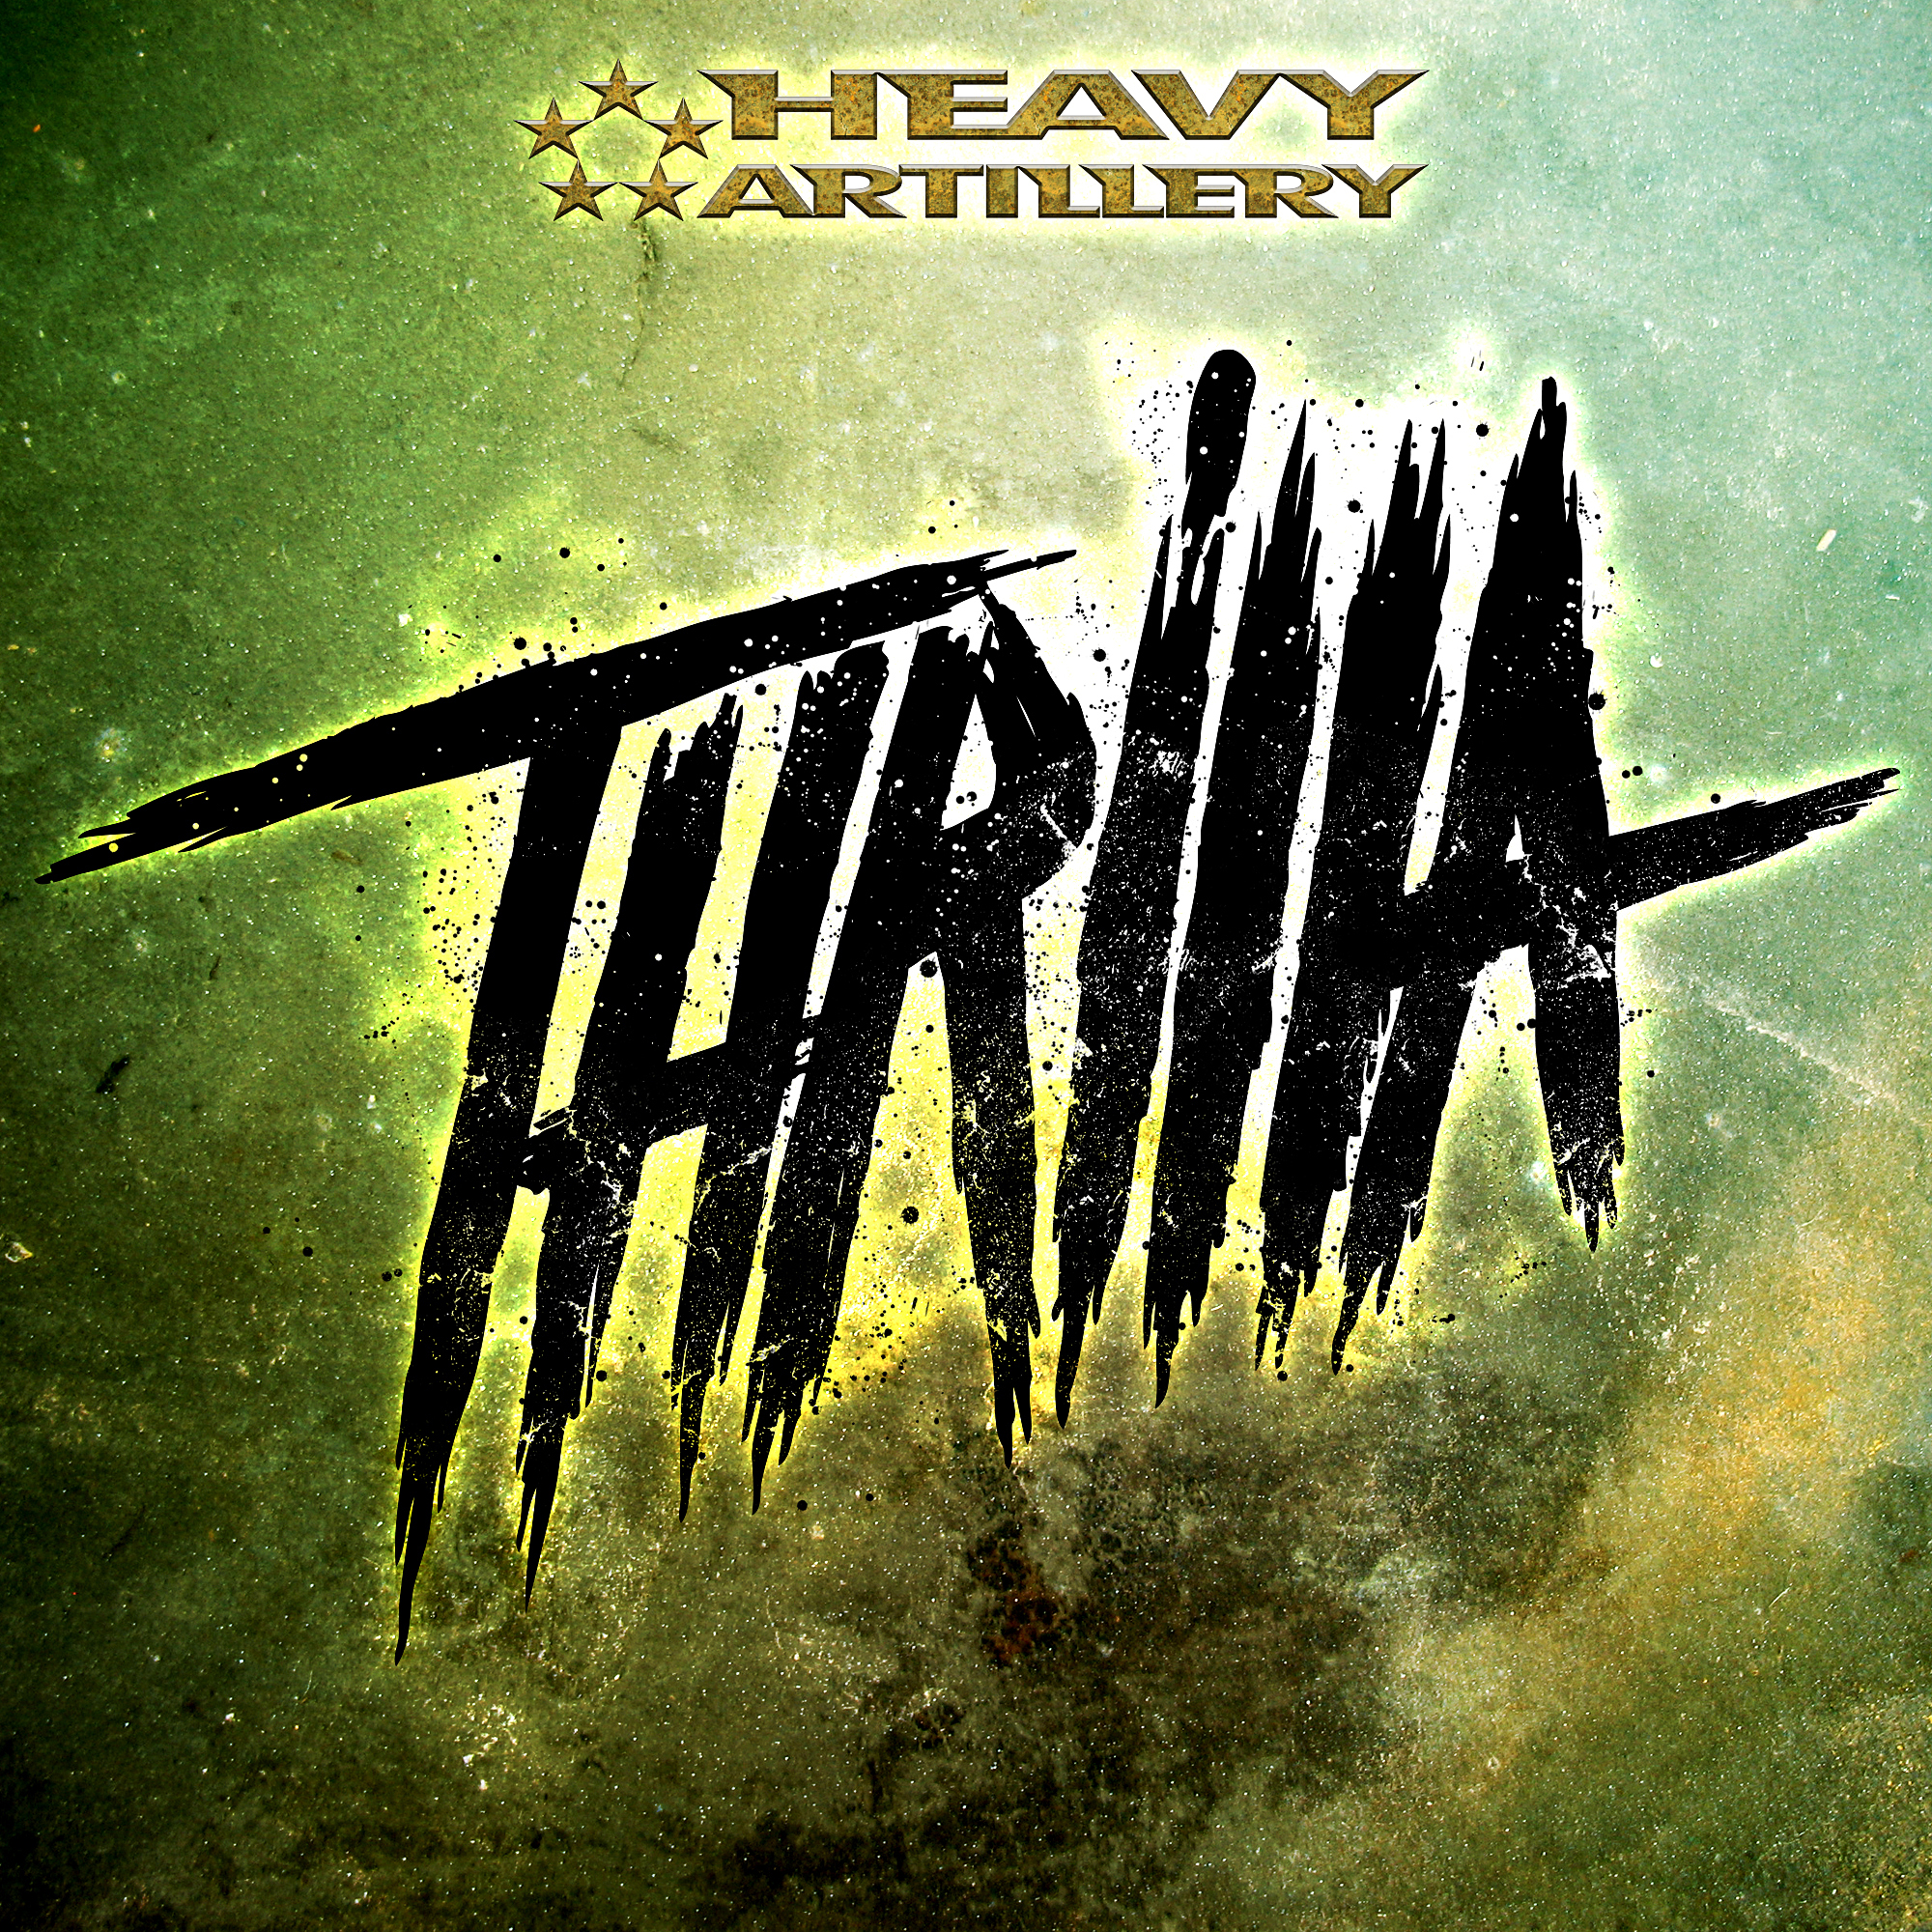 Thrilla – Thrilla EP (2012) (Preview) [Dubstep / Glitch Hop]: Out October 8th